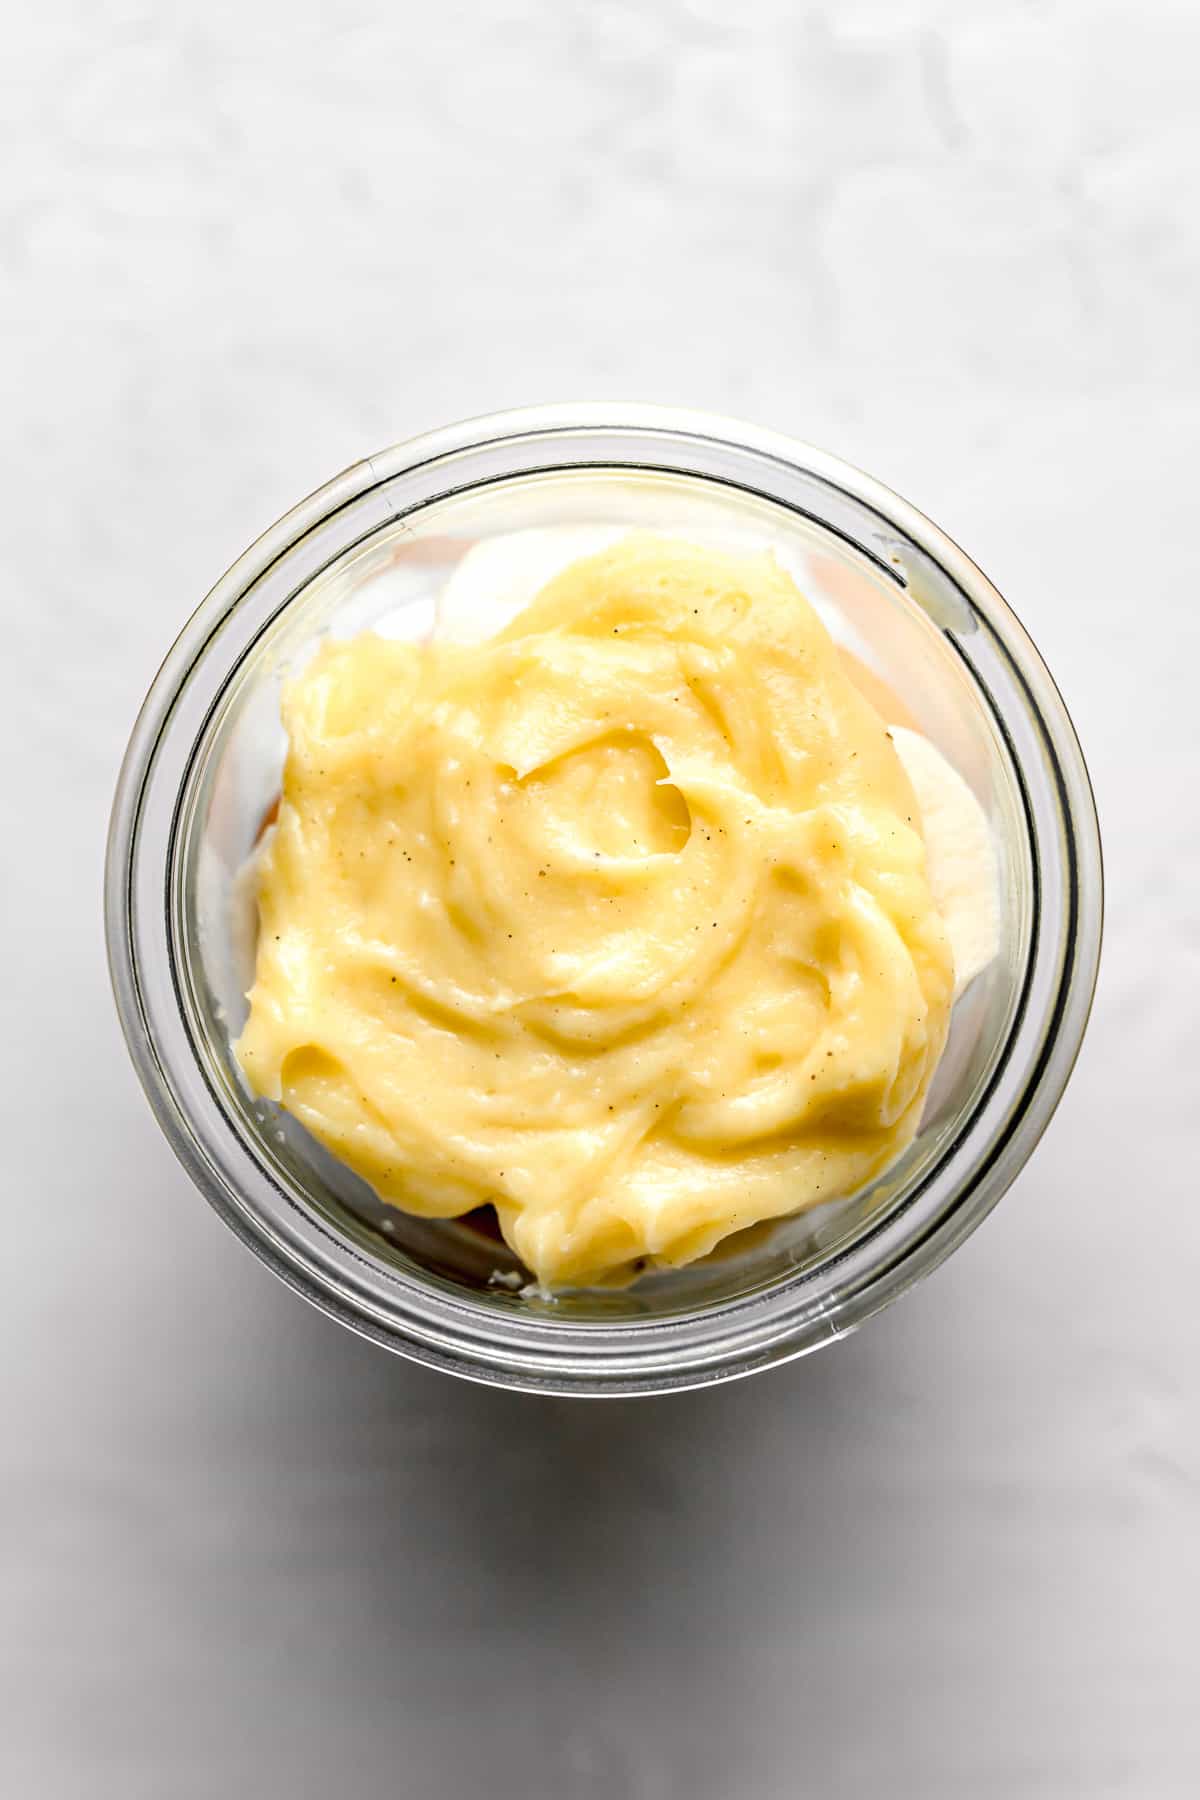 layer of pastry cream added in jar